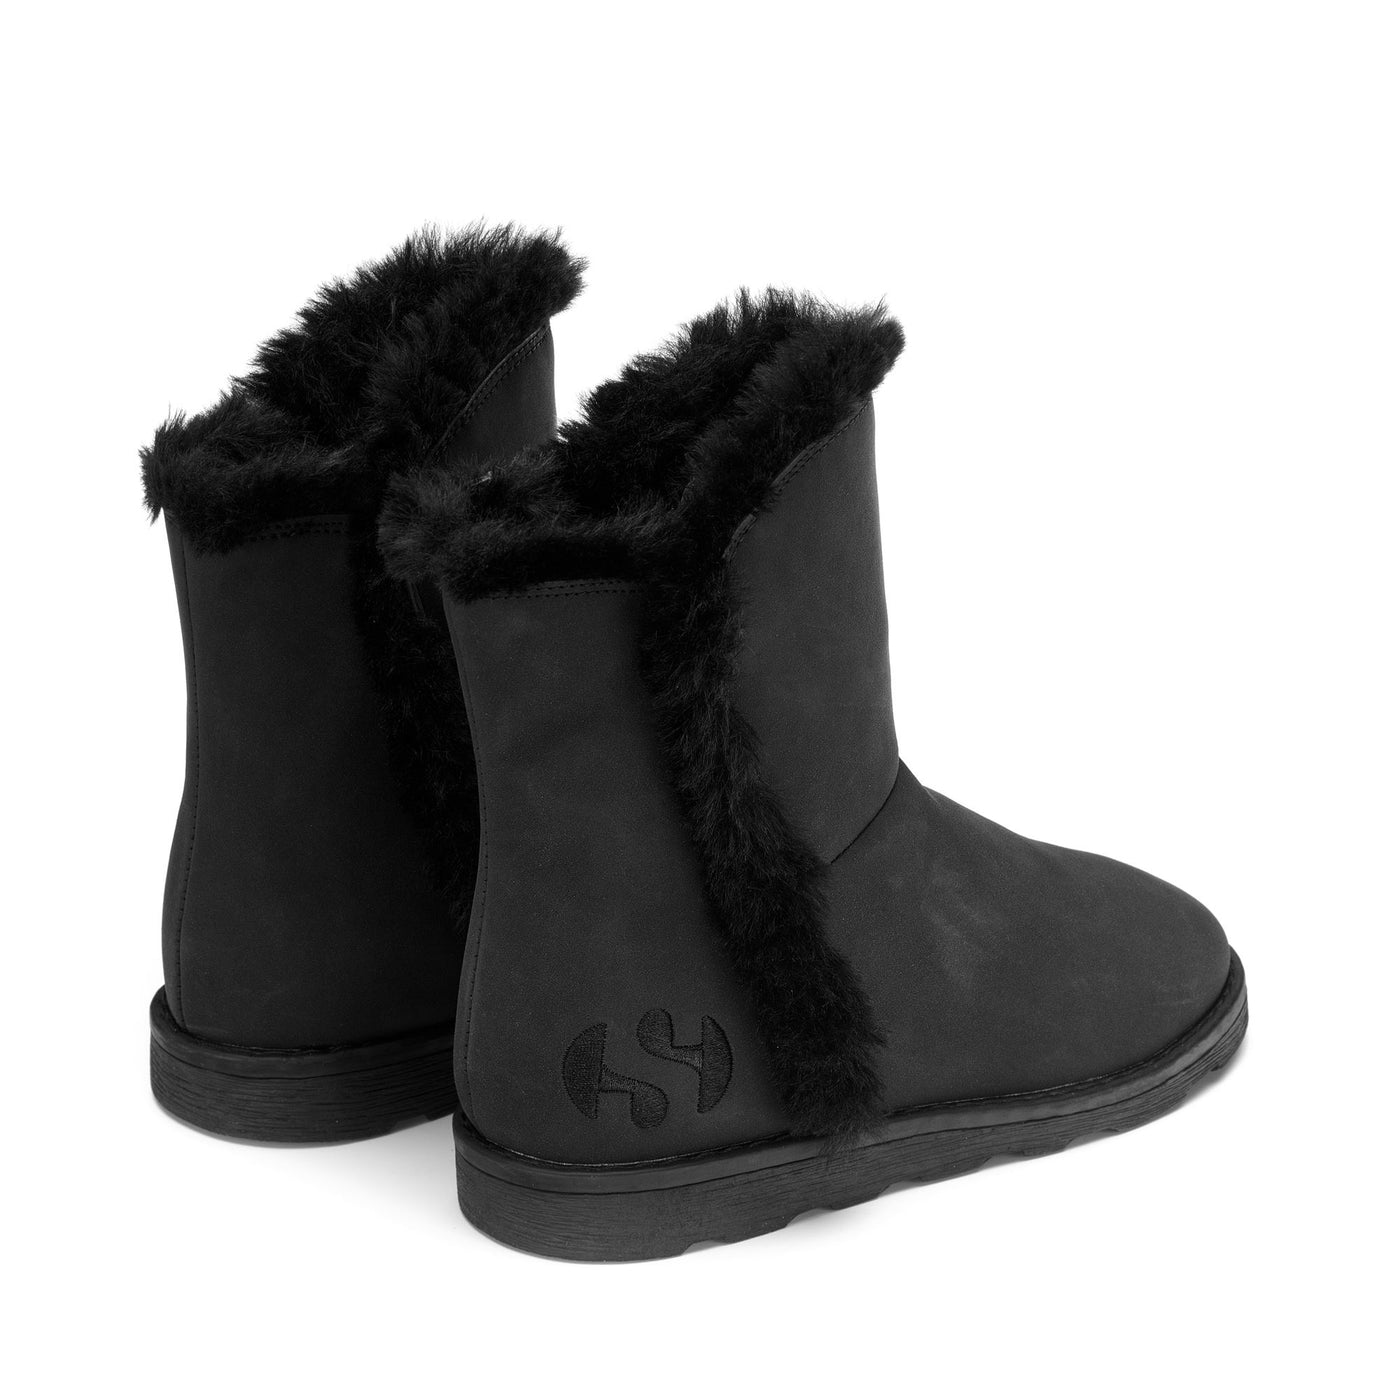 Boots Girl 4033 KIDS FAUX SUEDE Boot TOTAL BLACK Dressed Side (jpg Rgb)		